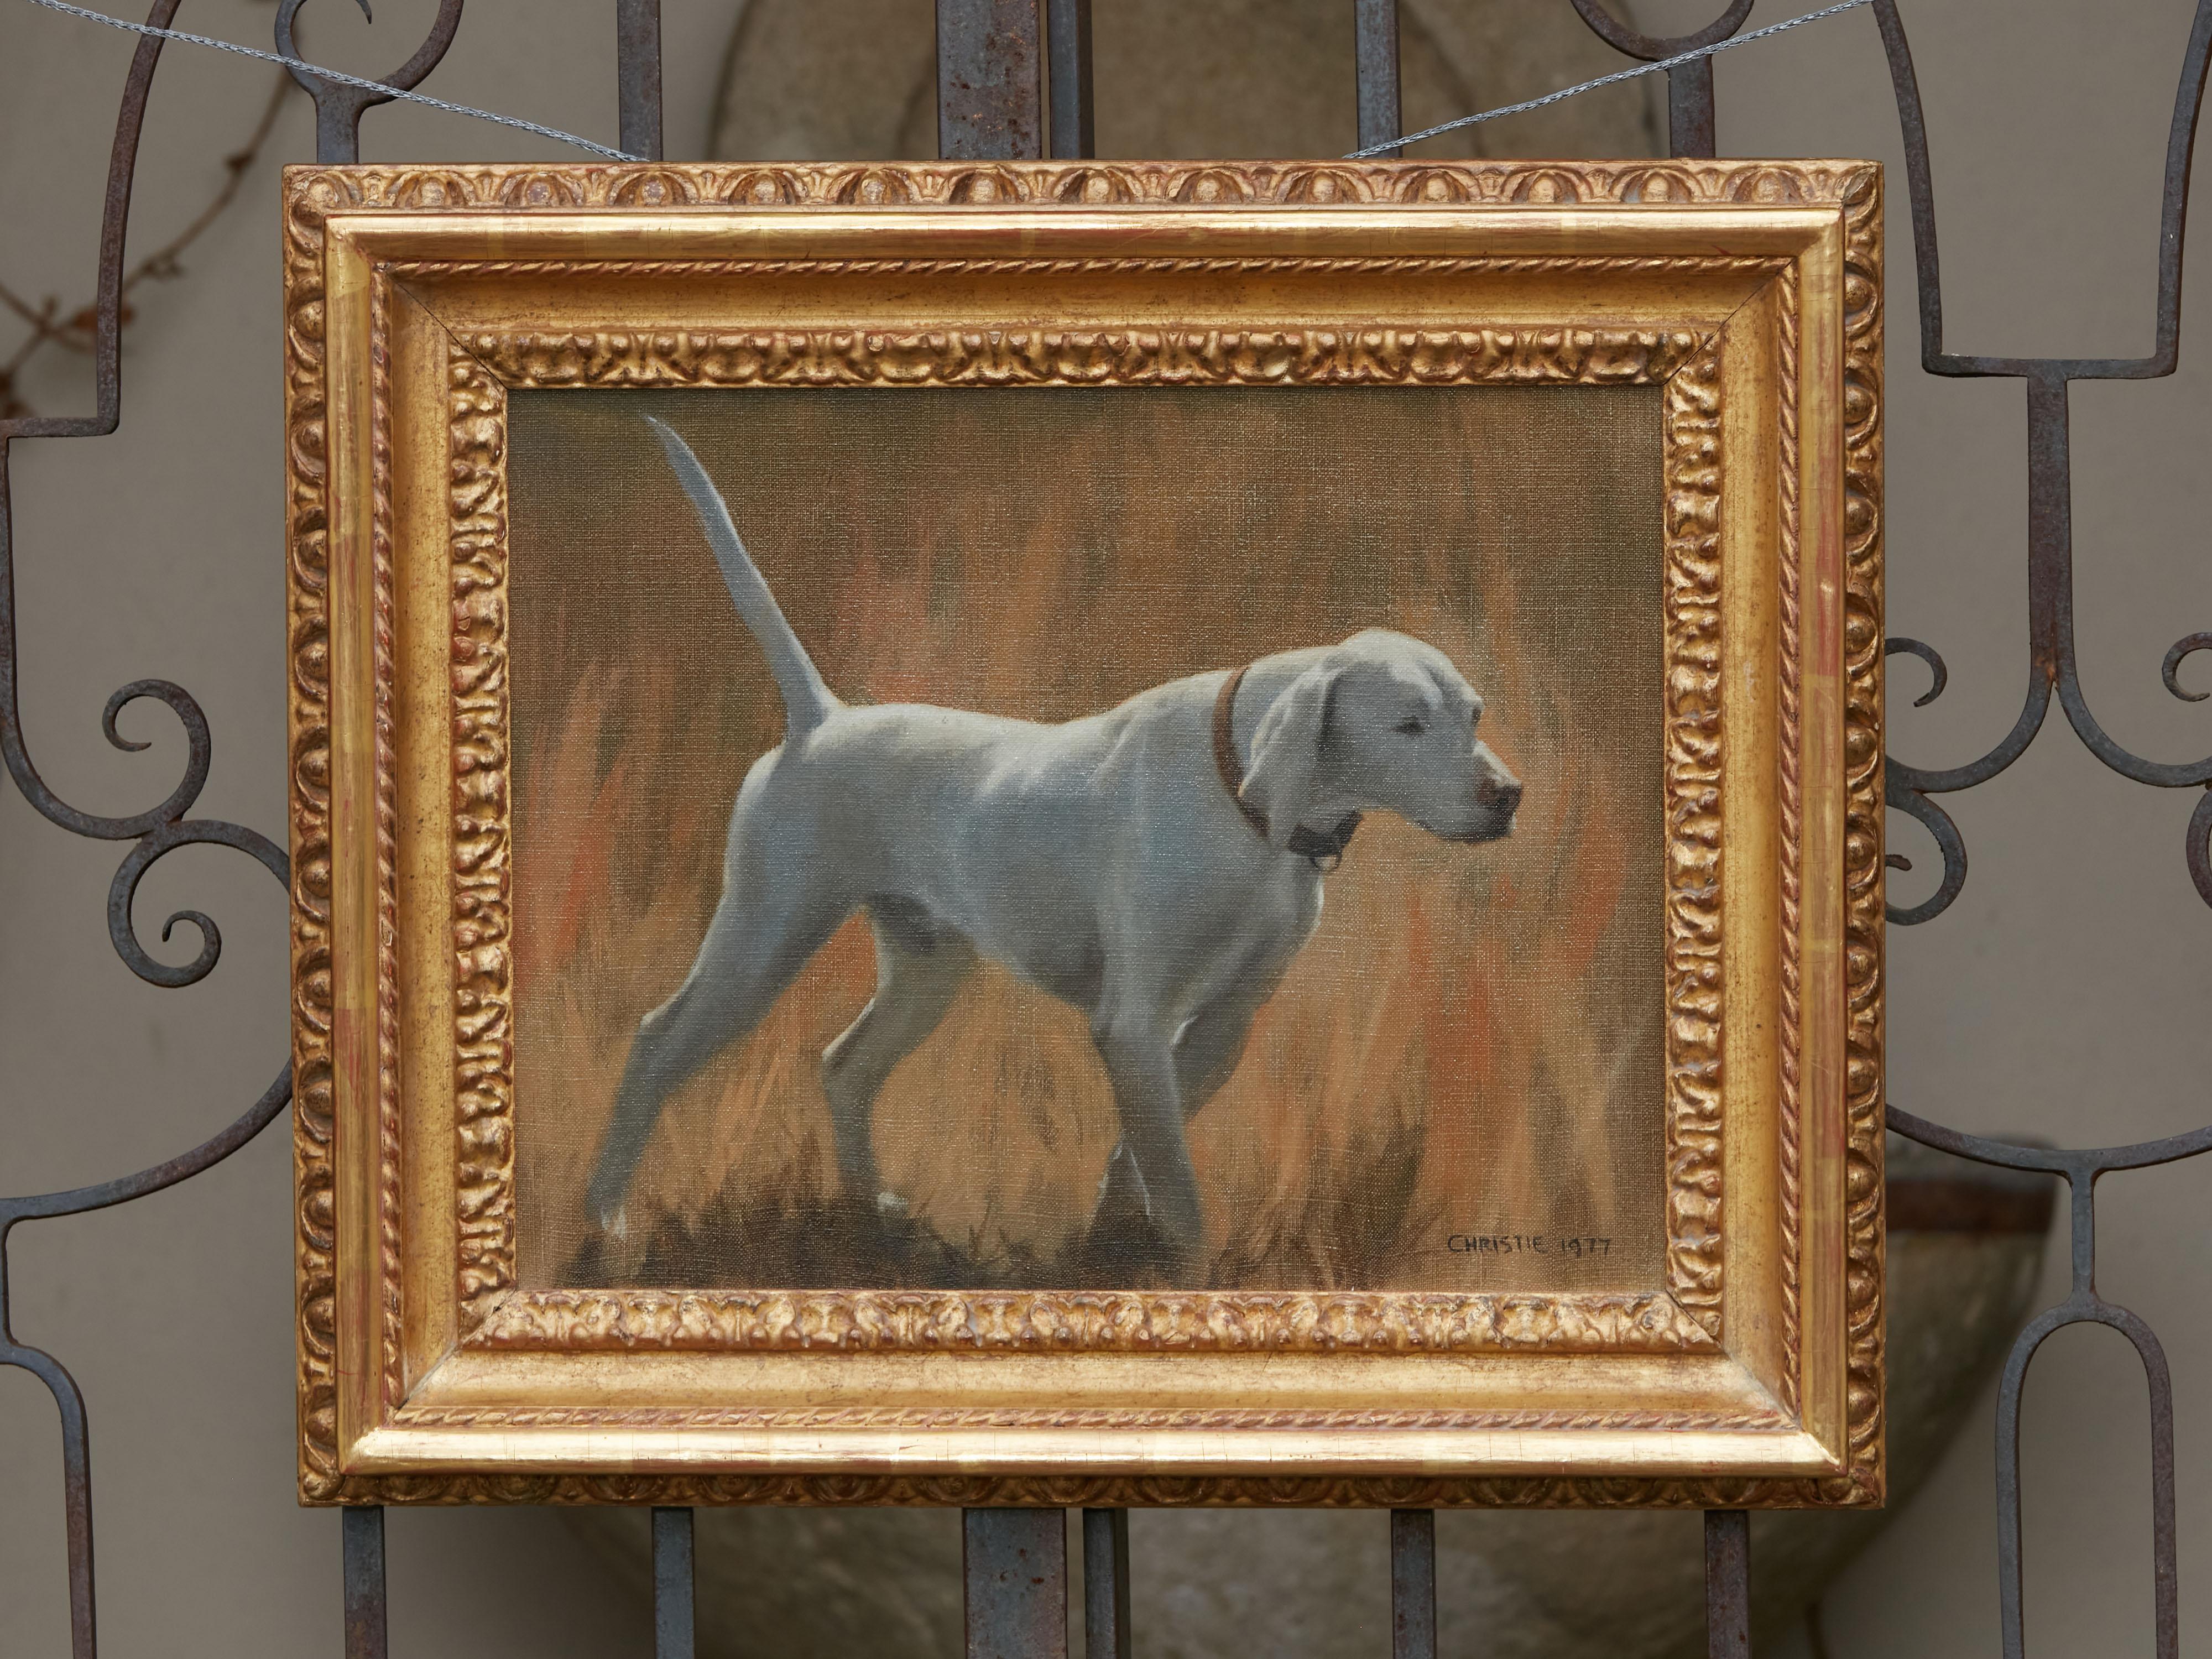 An oil on canvas painting from the 20th century depicting a sporting dog and signed Christie. Created during the third quarter of the 20th century, this horizontal oil on canvas painting features a close-up view of a white sporting dog. Setting the